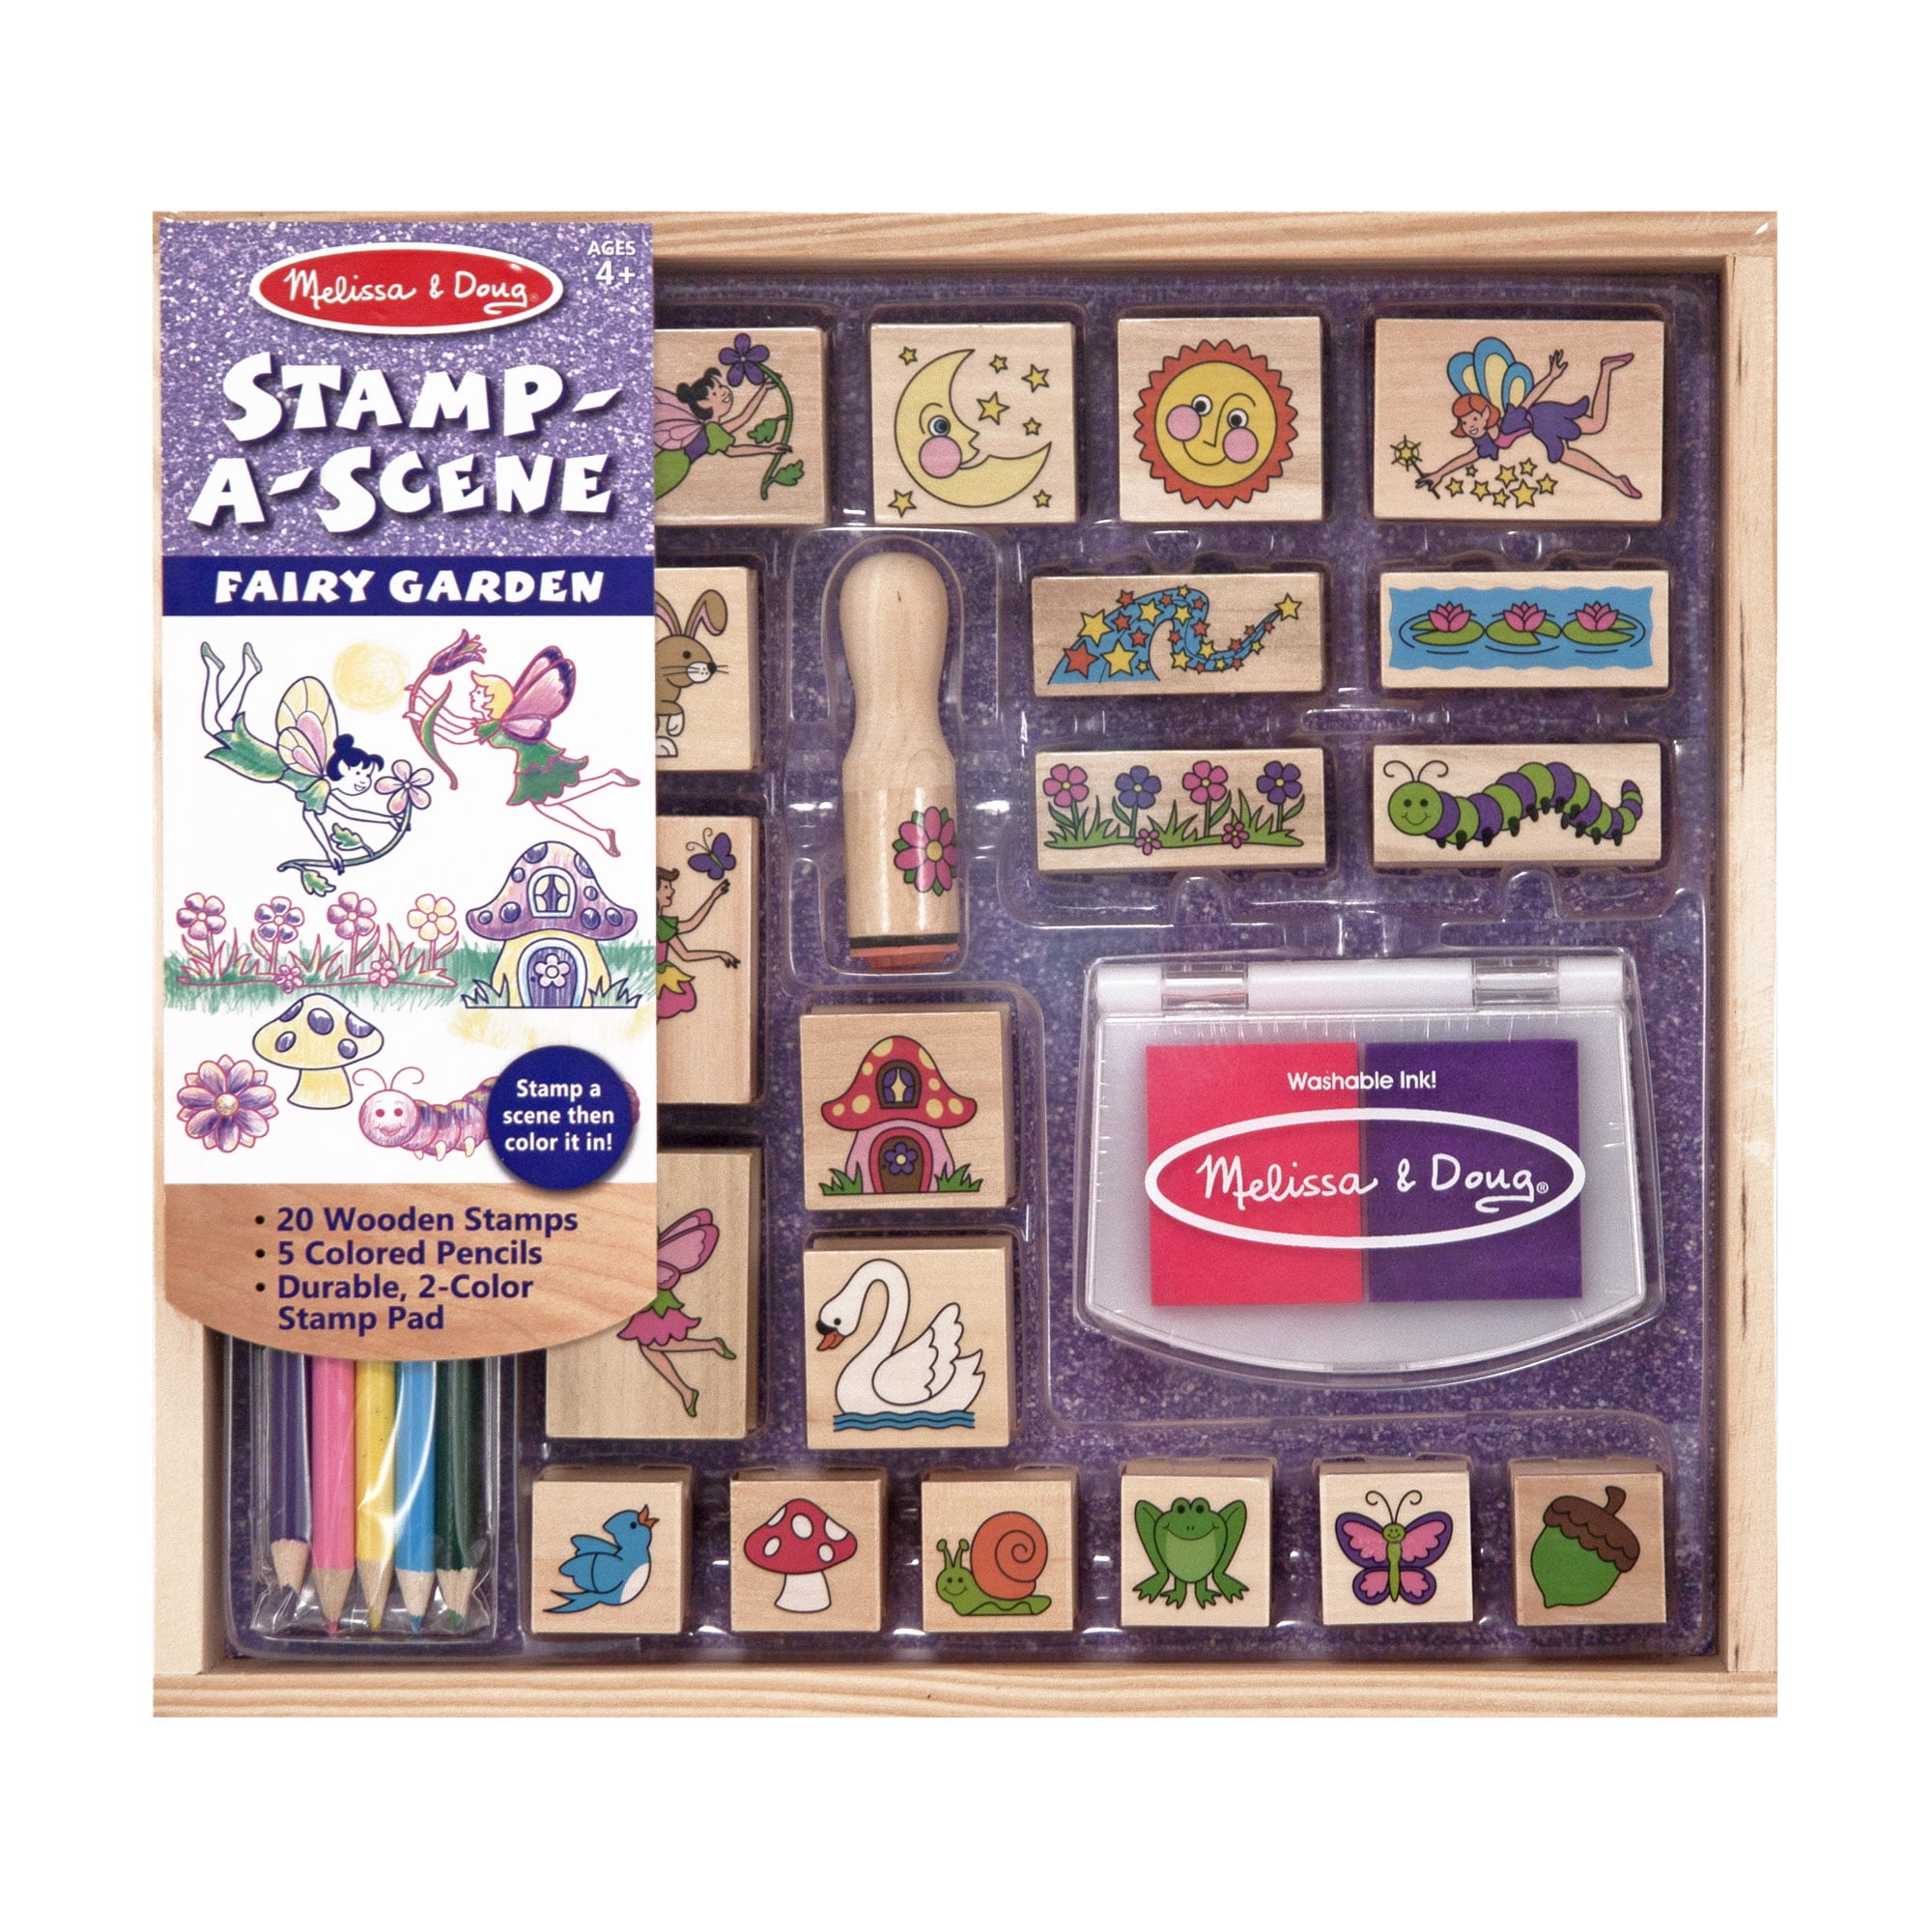  5 Point Star Rubber Stamp : Toys & Games